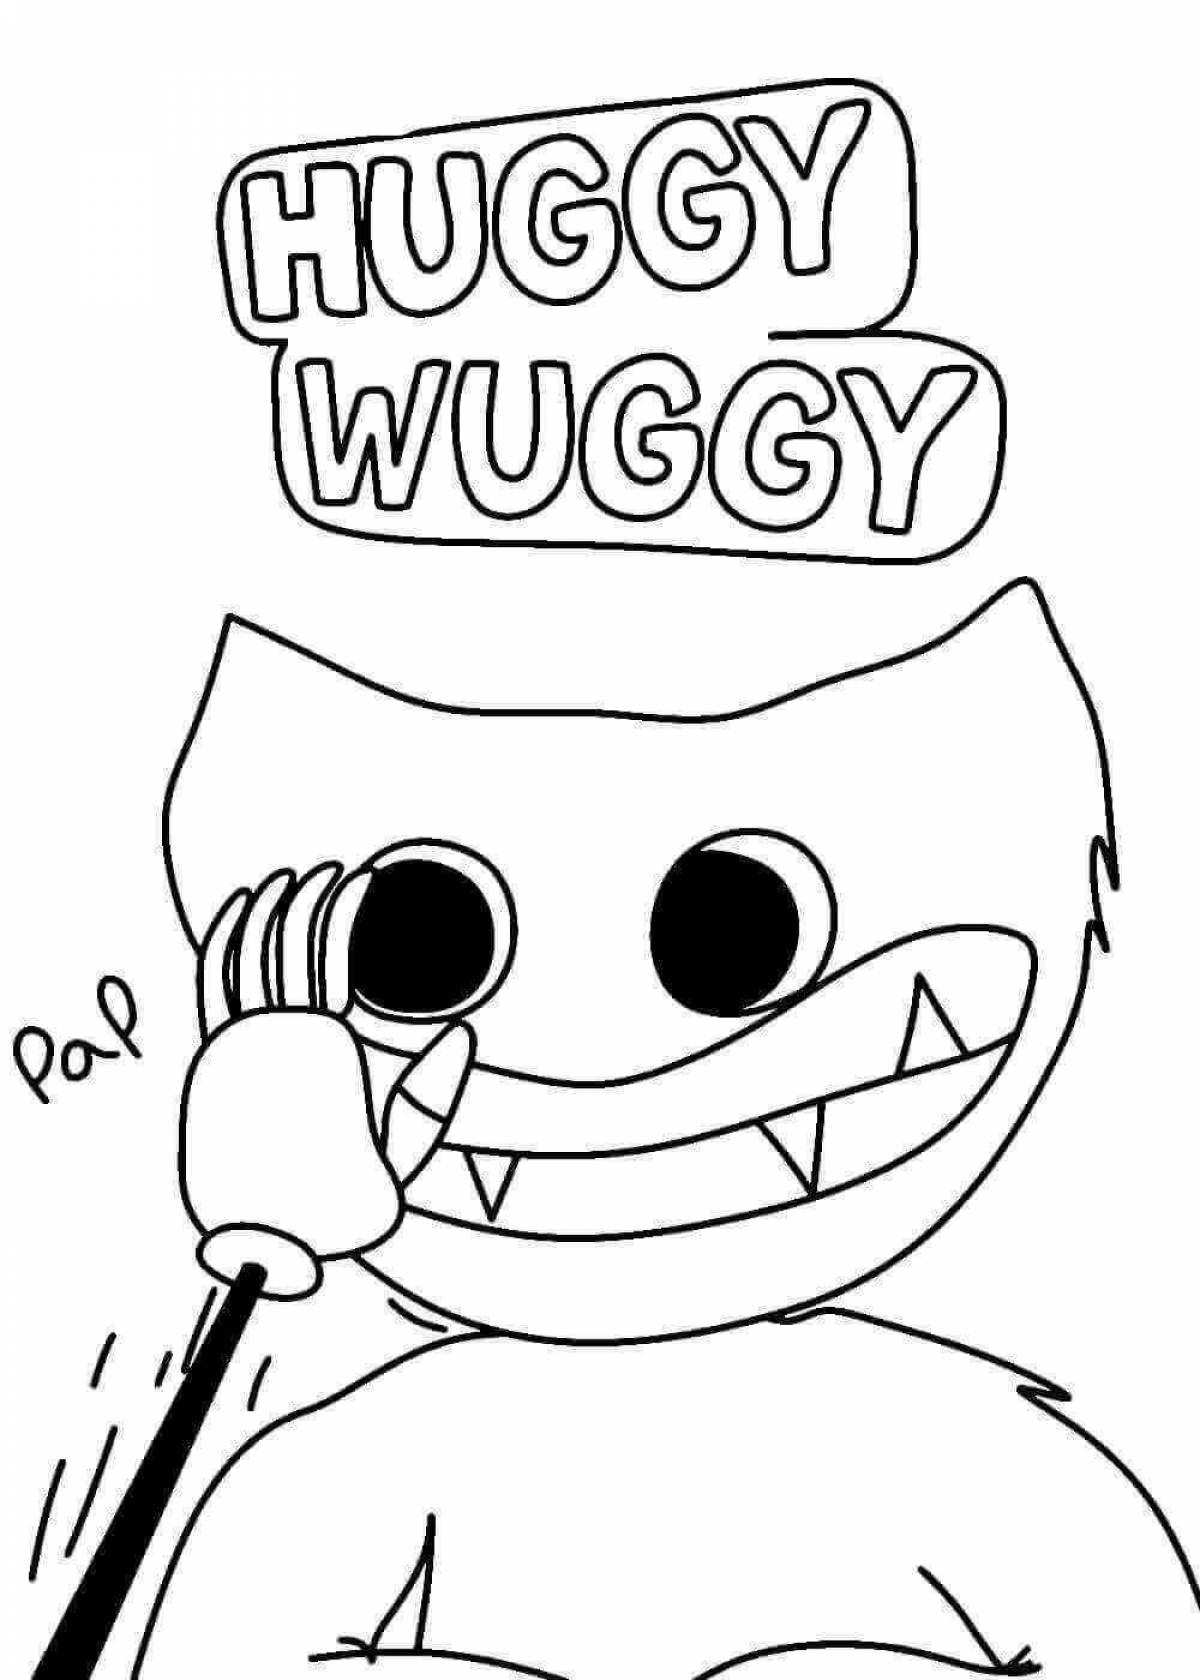 Huggy waggie bright coloring